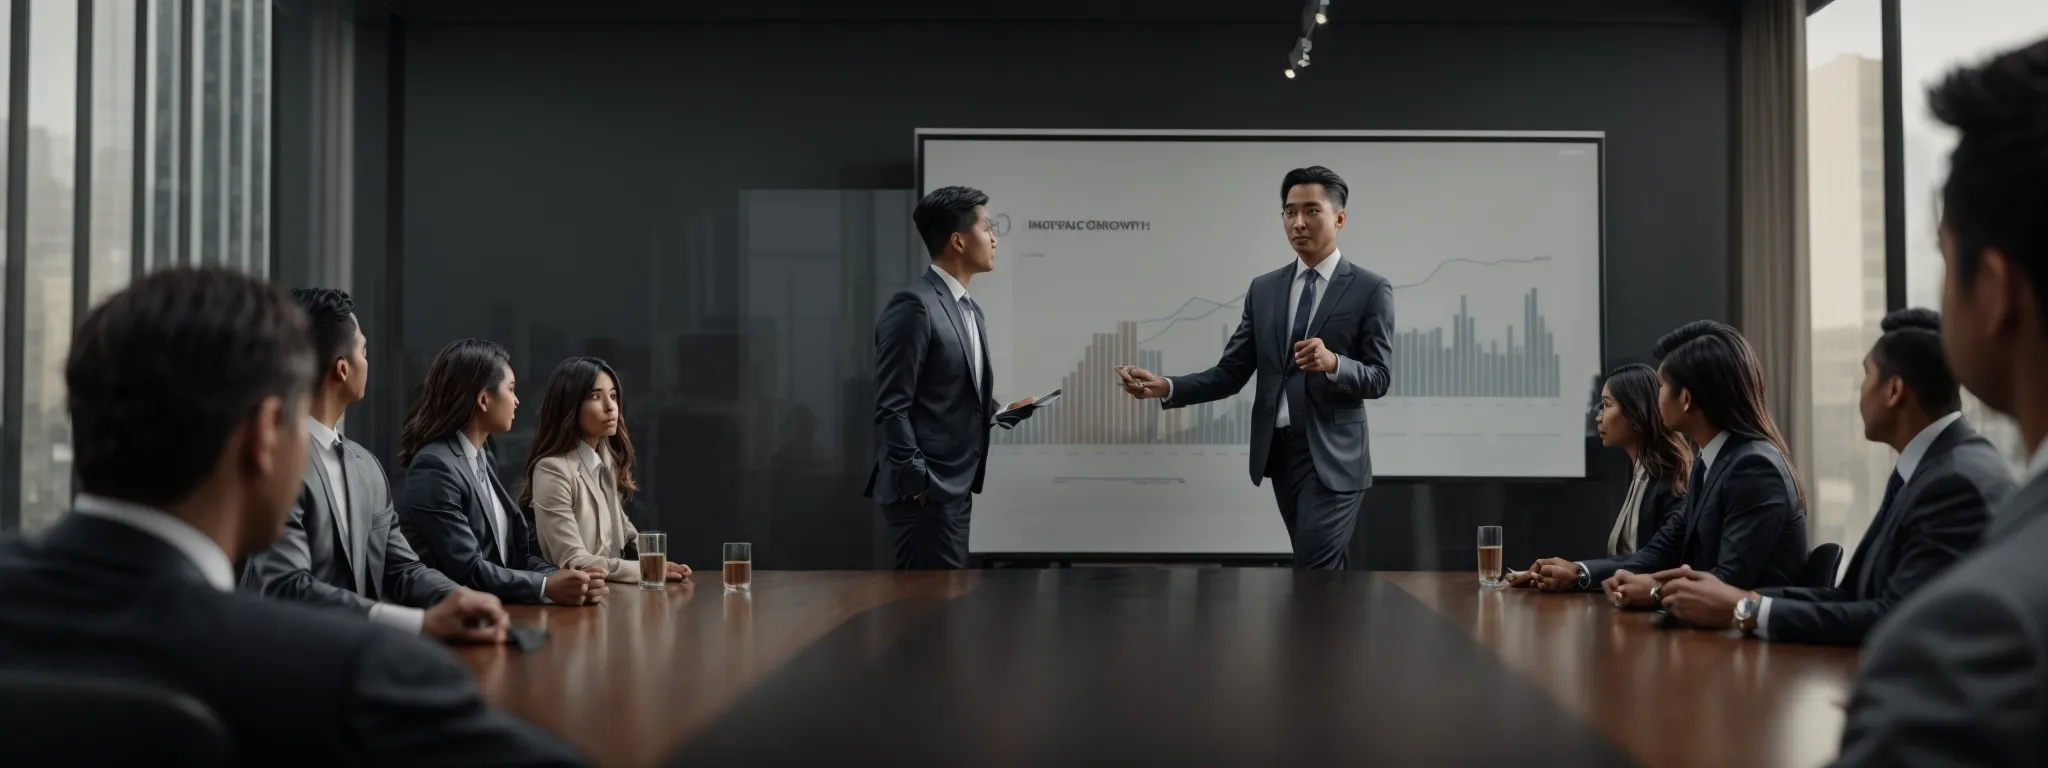 a confident marketer presents a graph showing upward growth to a group of attentive executives in a sleek boardroom.